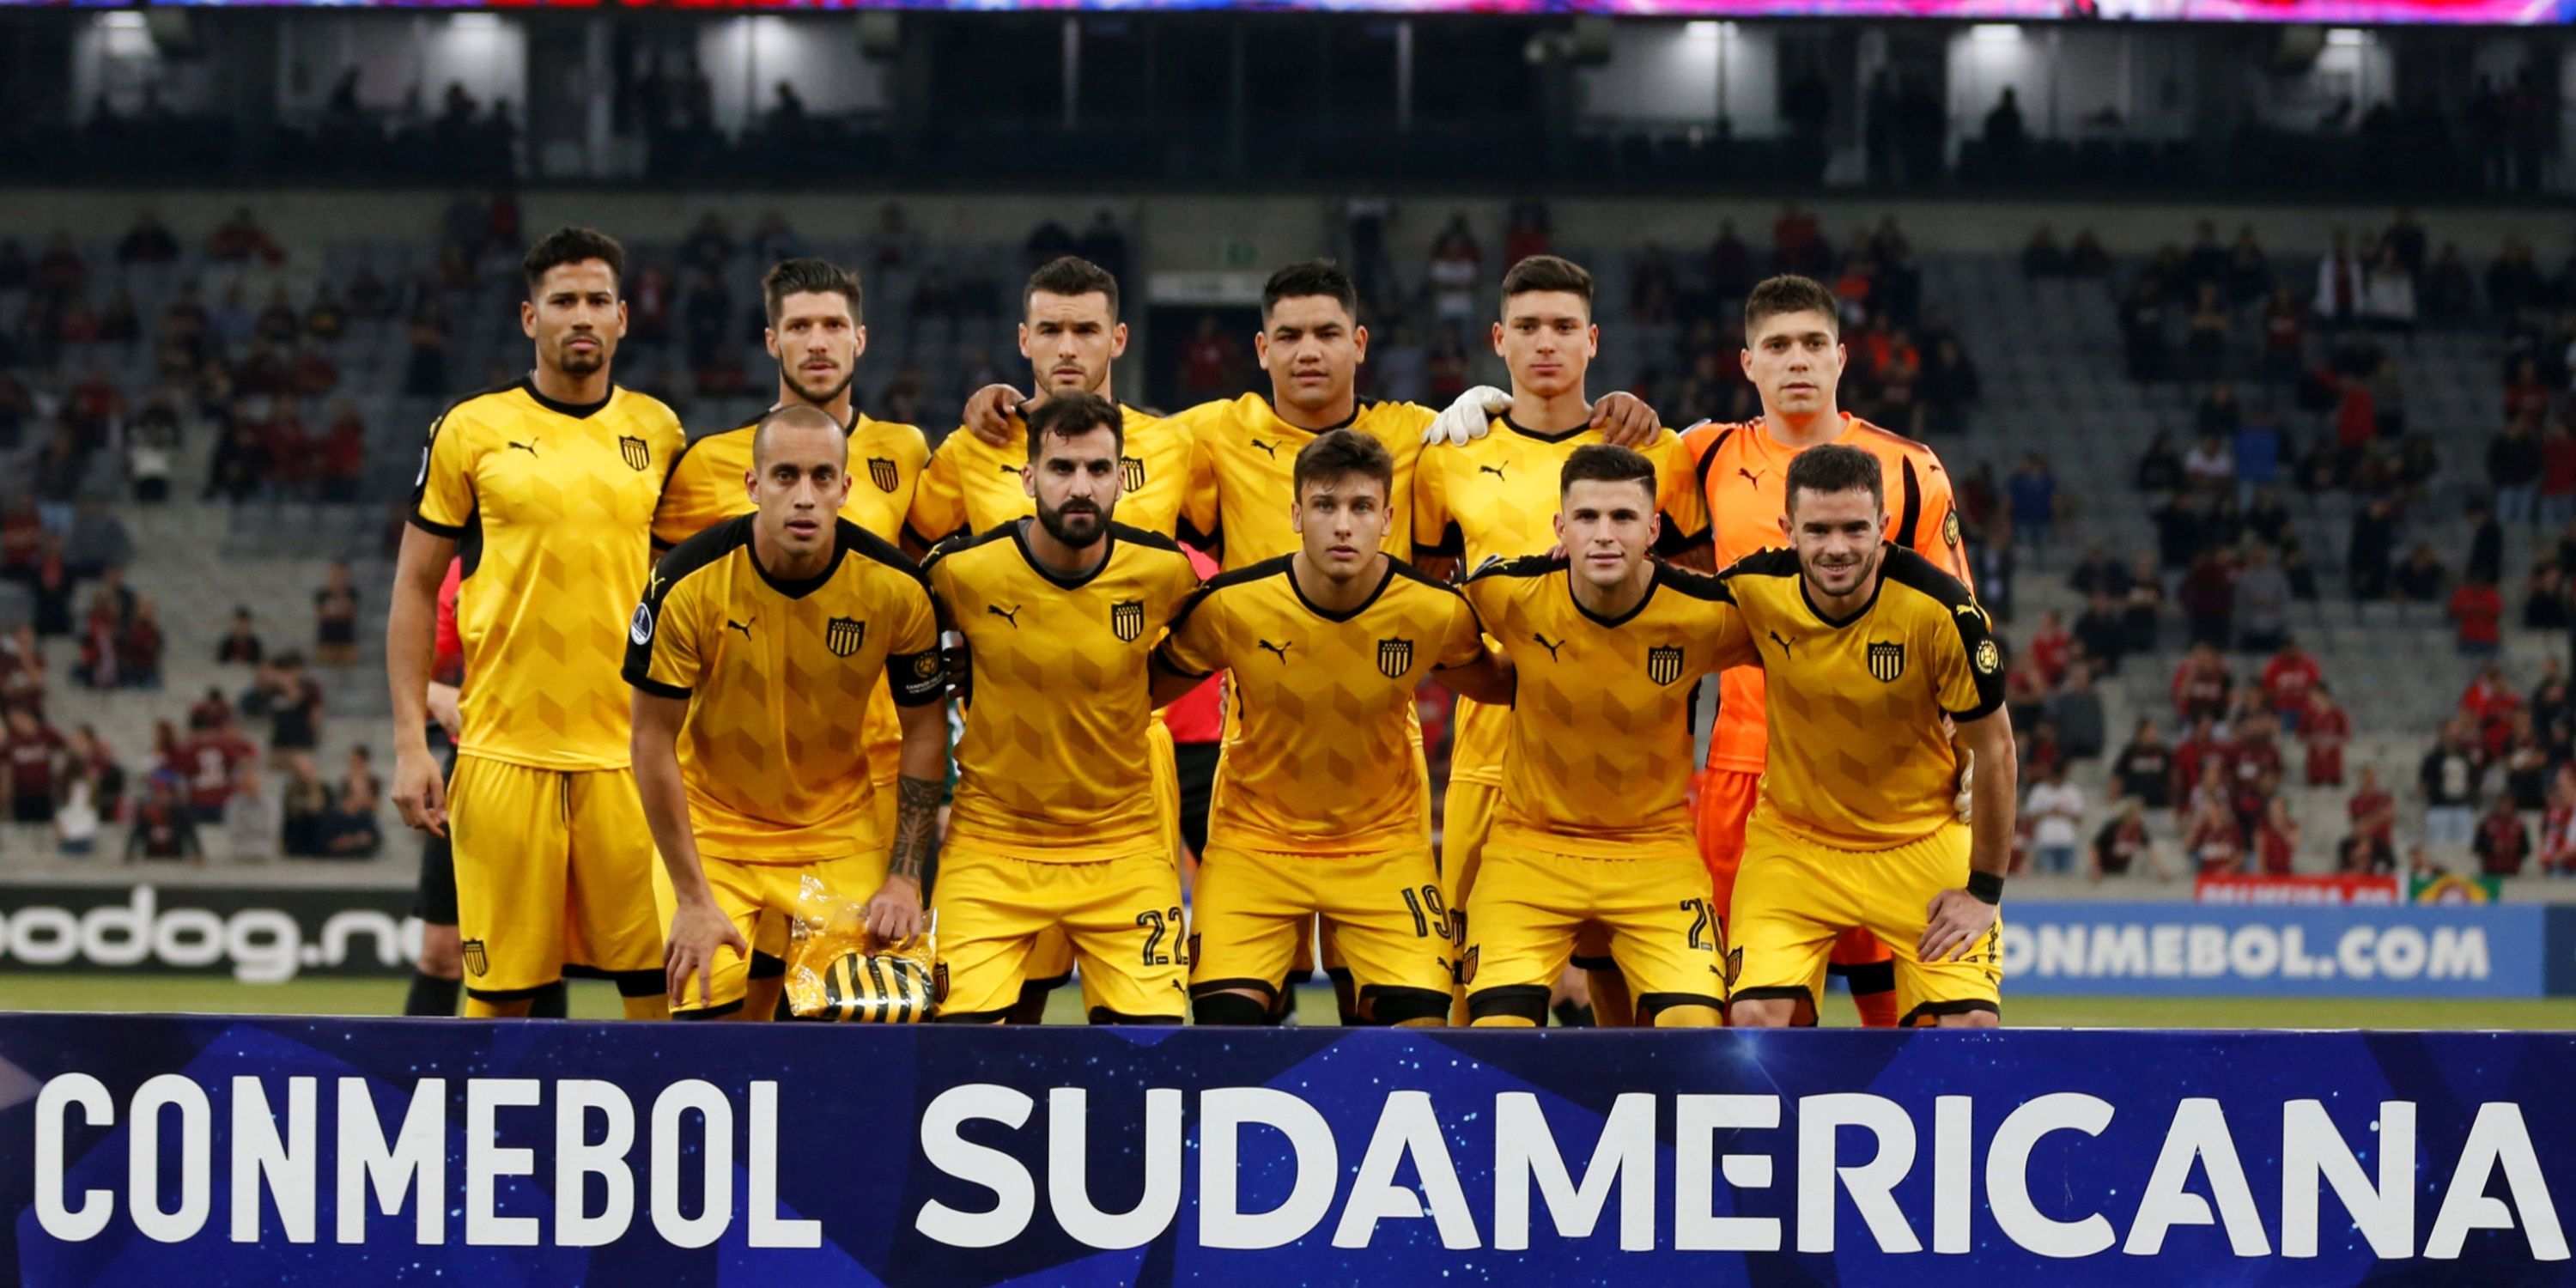 Players of Penarol pose before the match.